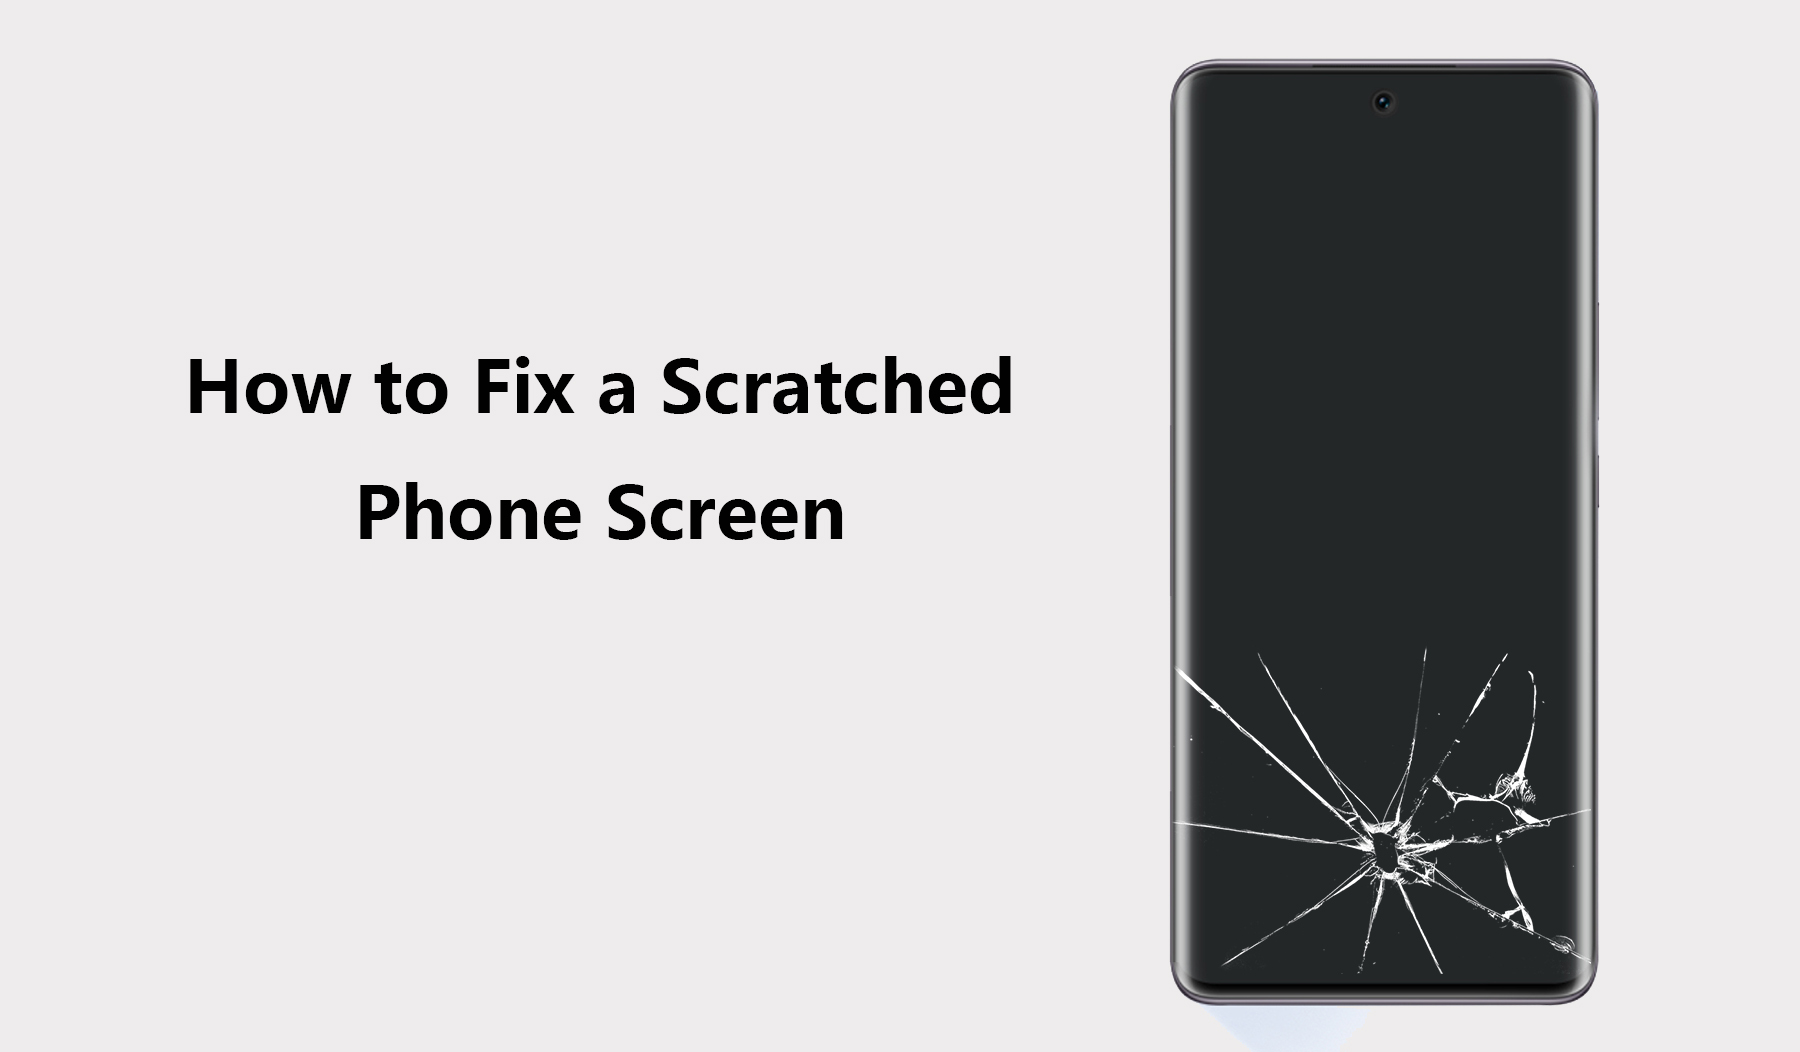 How to Repair Scratches on Phone Screen (11 Easy Ways) - Celltech